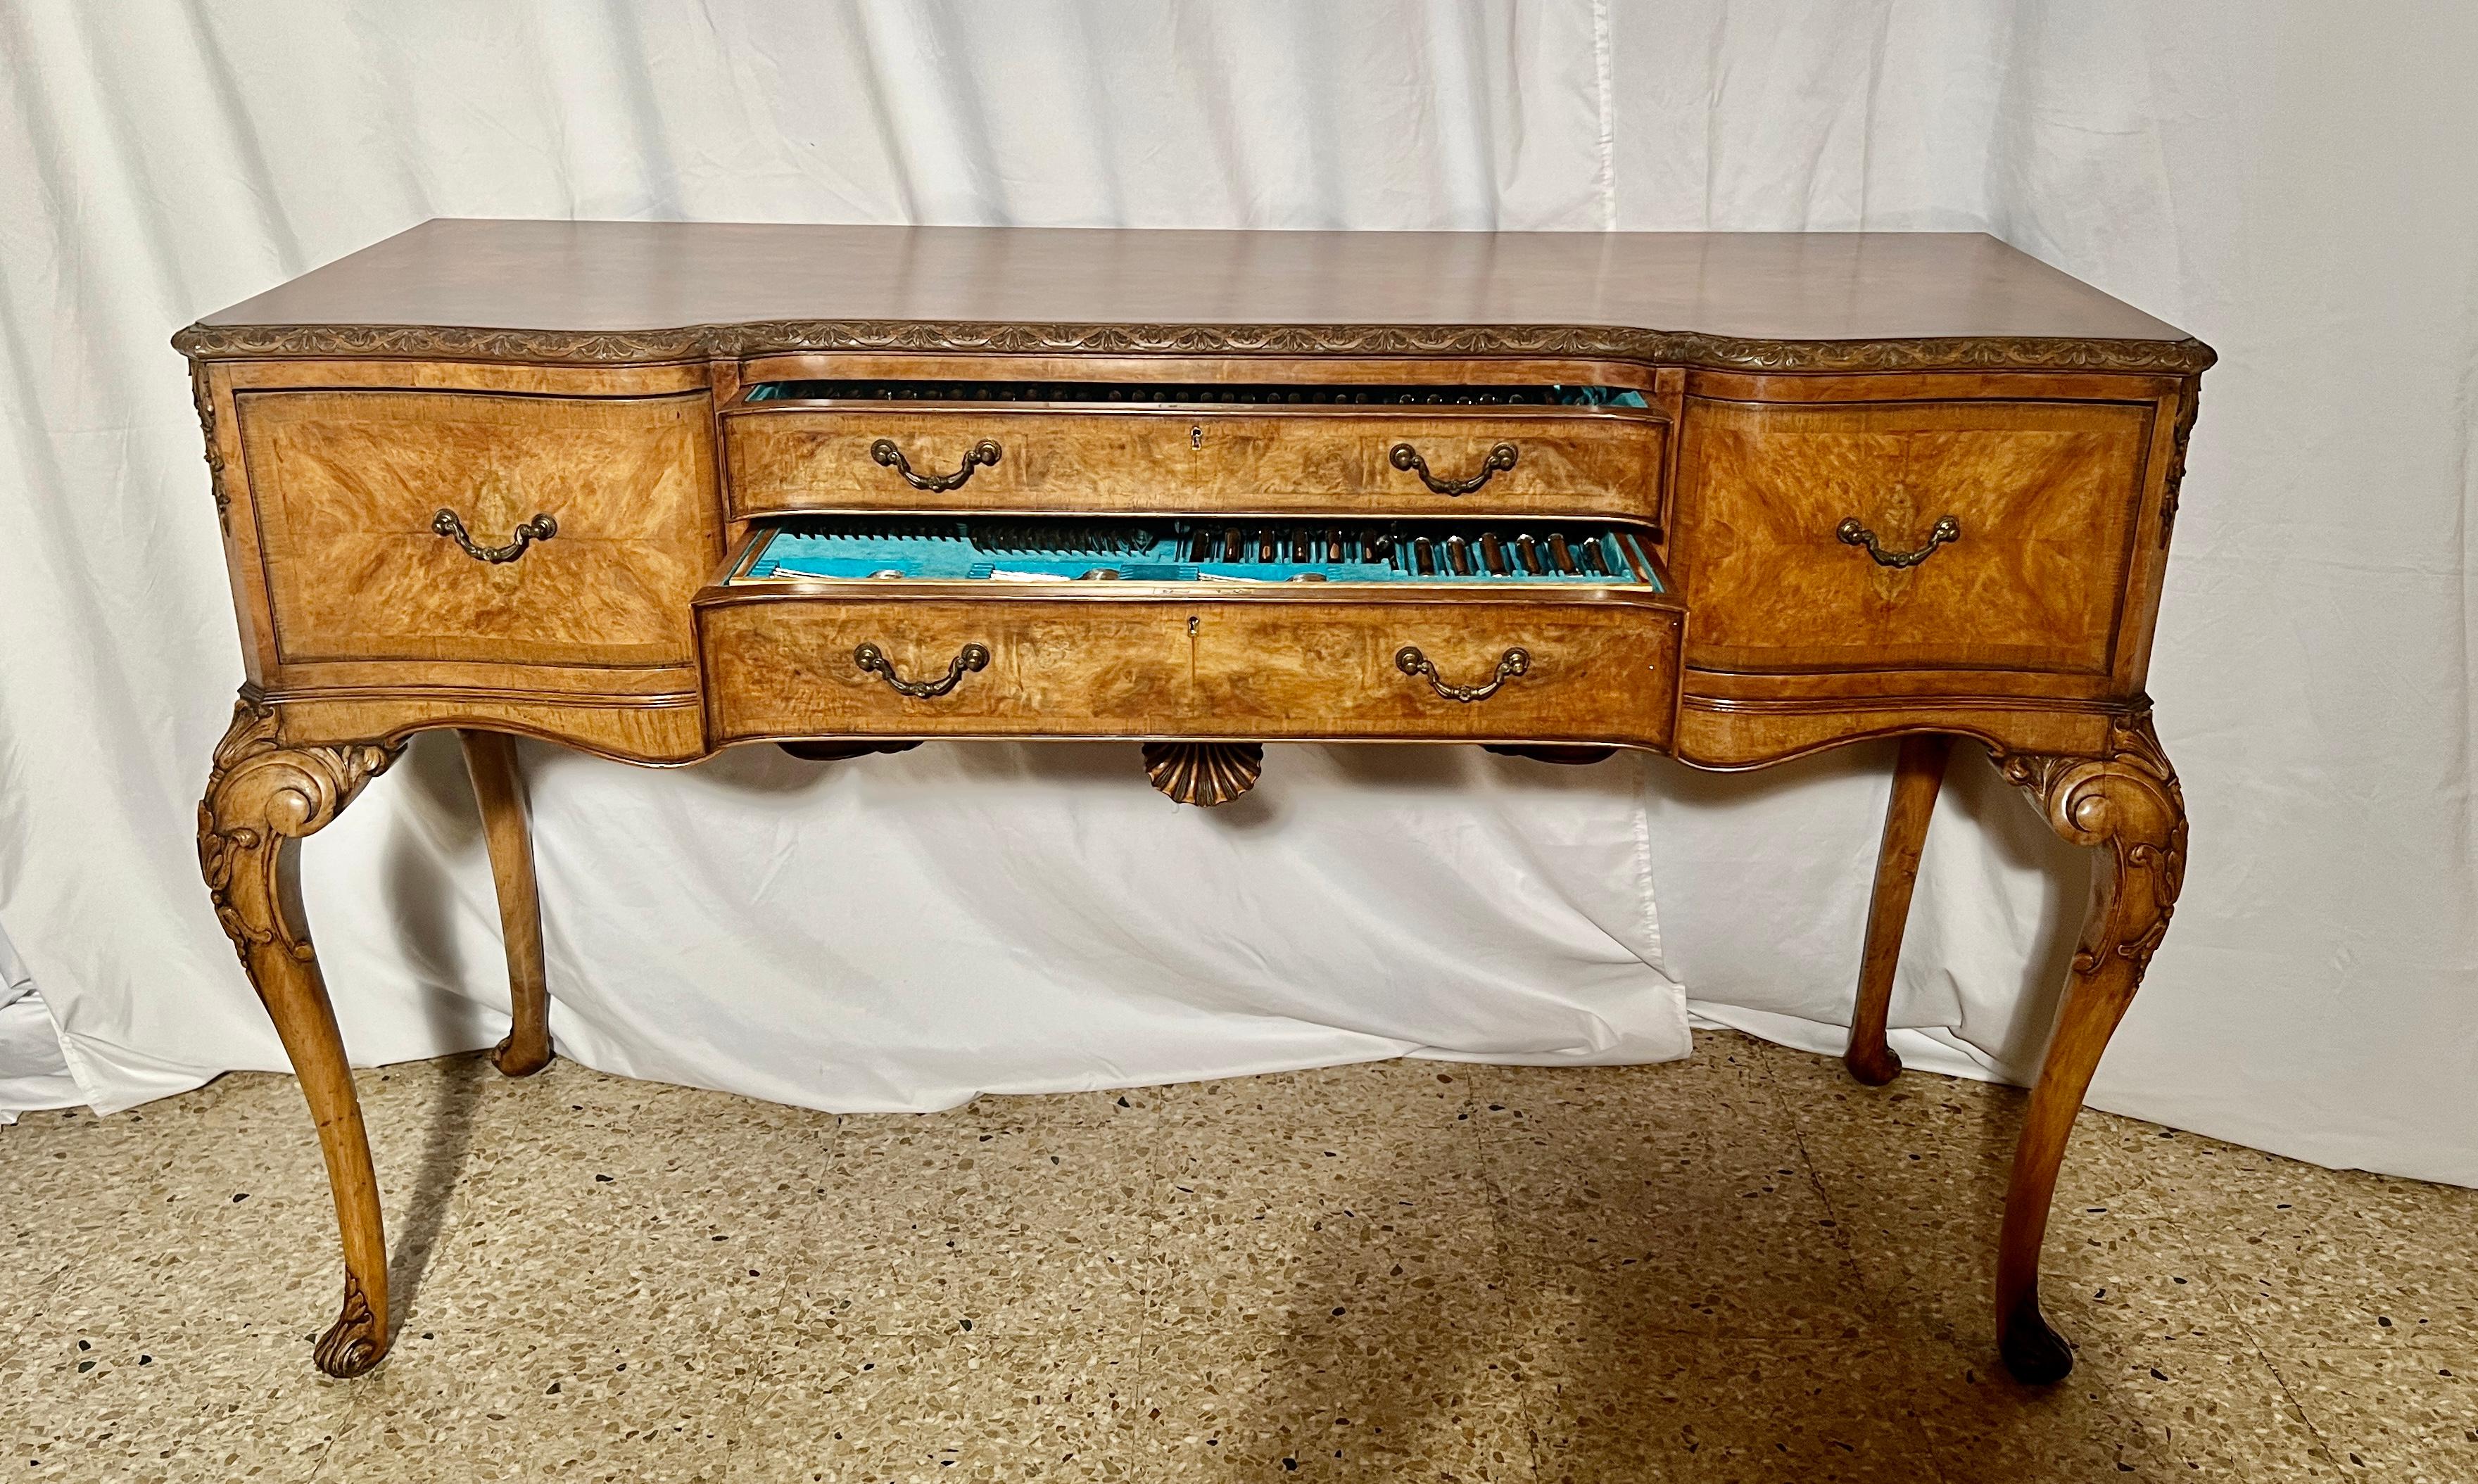 20th Century Antique English Burled Walnut Silver Chest on Legs with Flatware, Circa 1900. For Sale